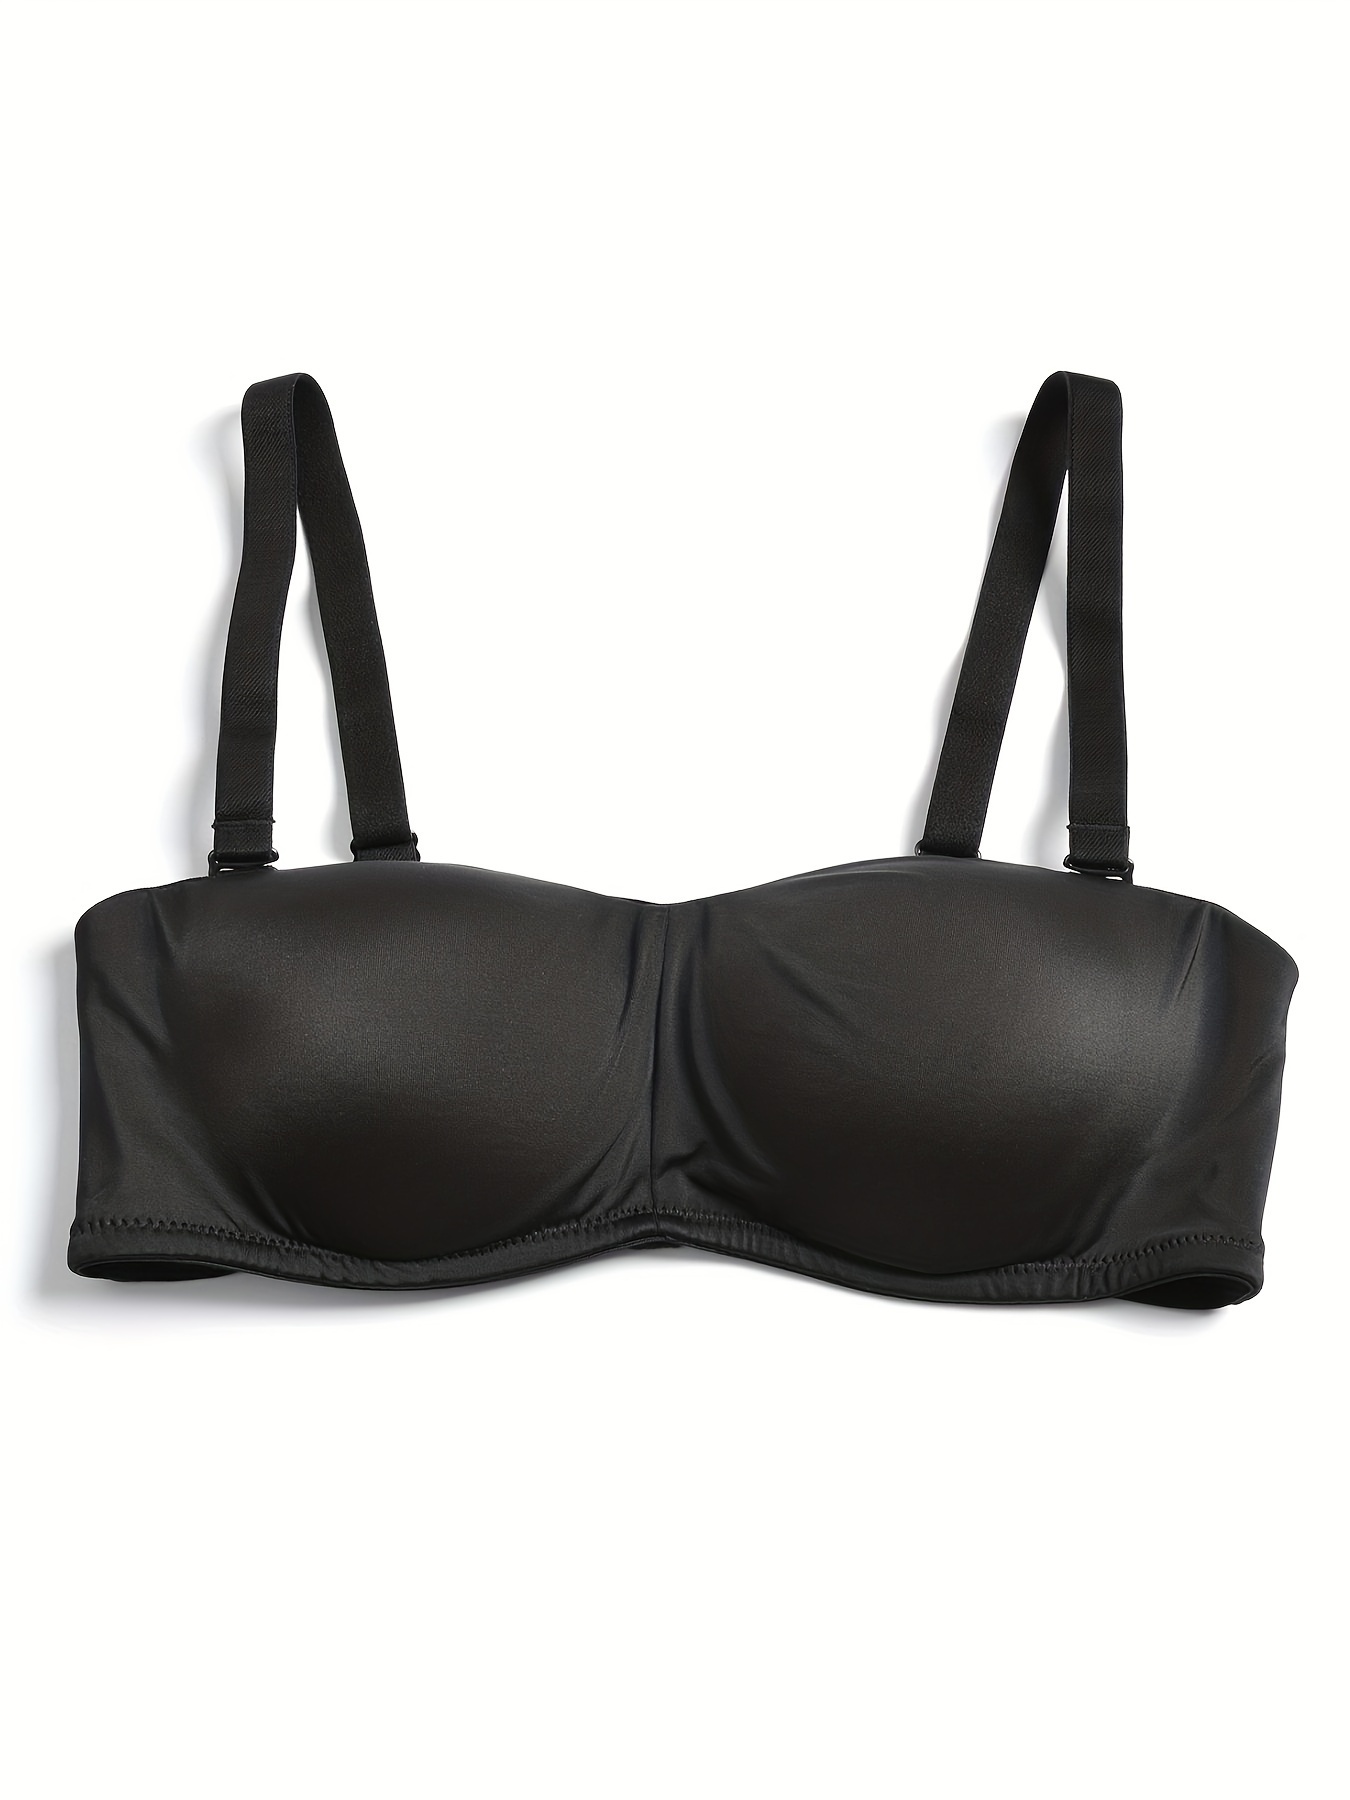 Bras For Women No Underwire Strapless Size Plus Removable Padded